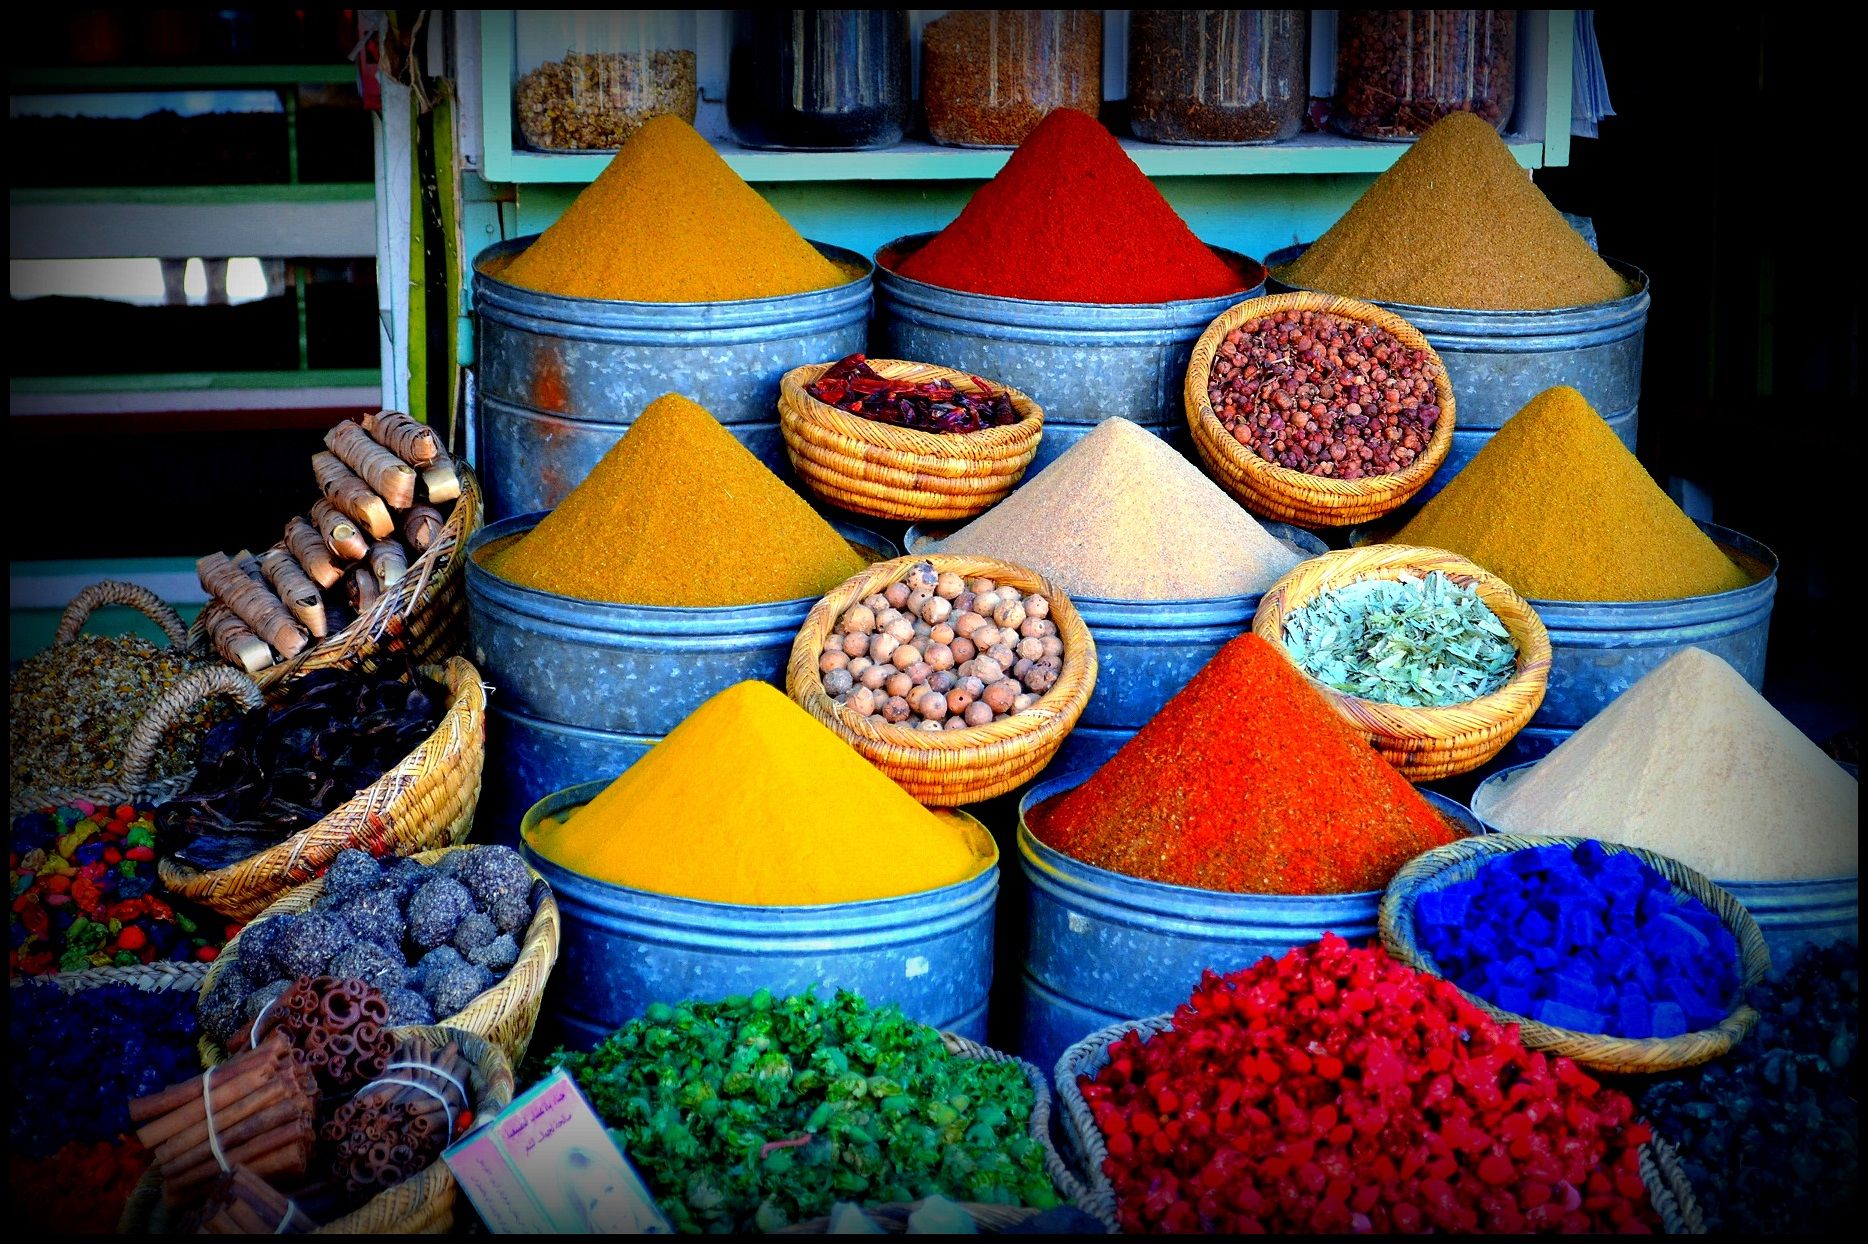 Full Day Museums & Souks Tour Of Marrakech